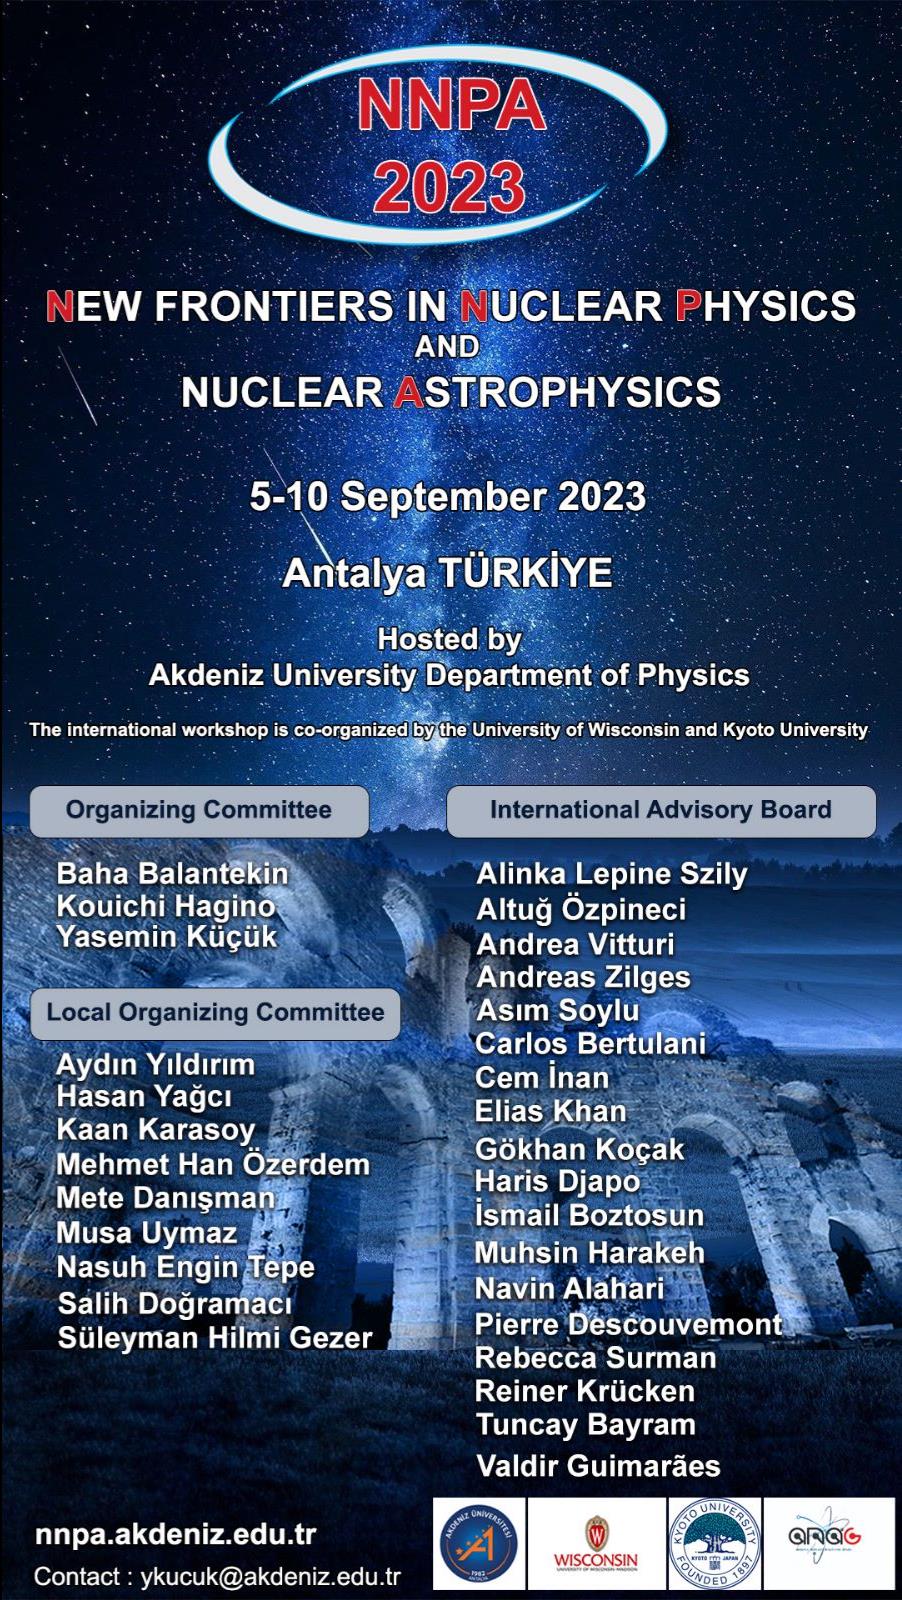 NEW FRONTIERS IN NUCLEAR  PHYSICS AND ASTROPHYSICS-2